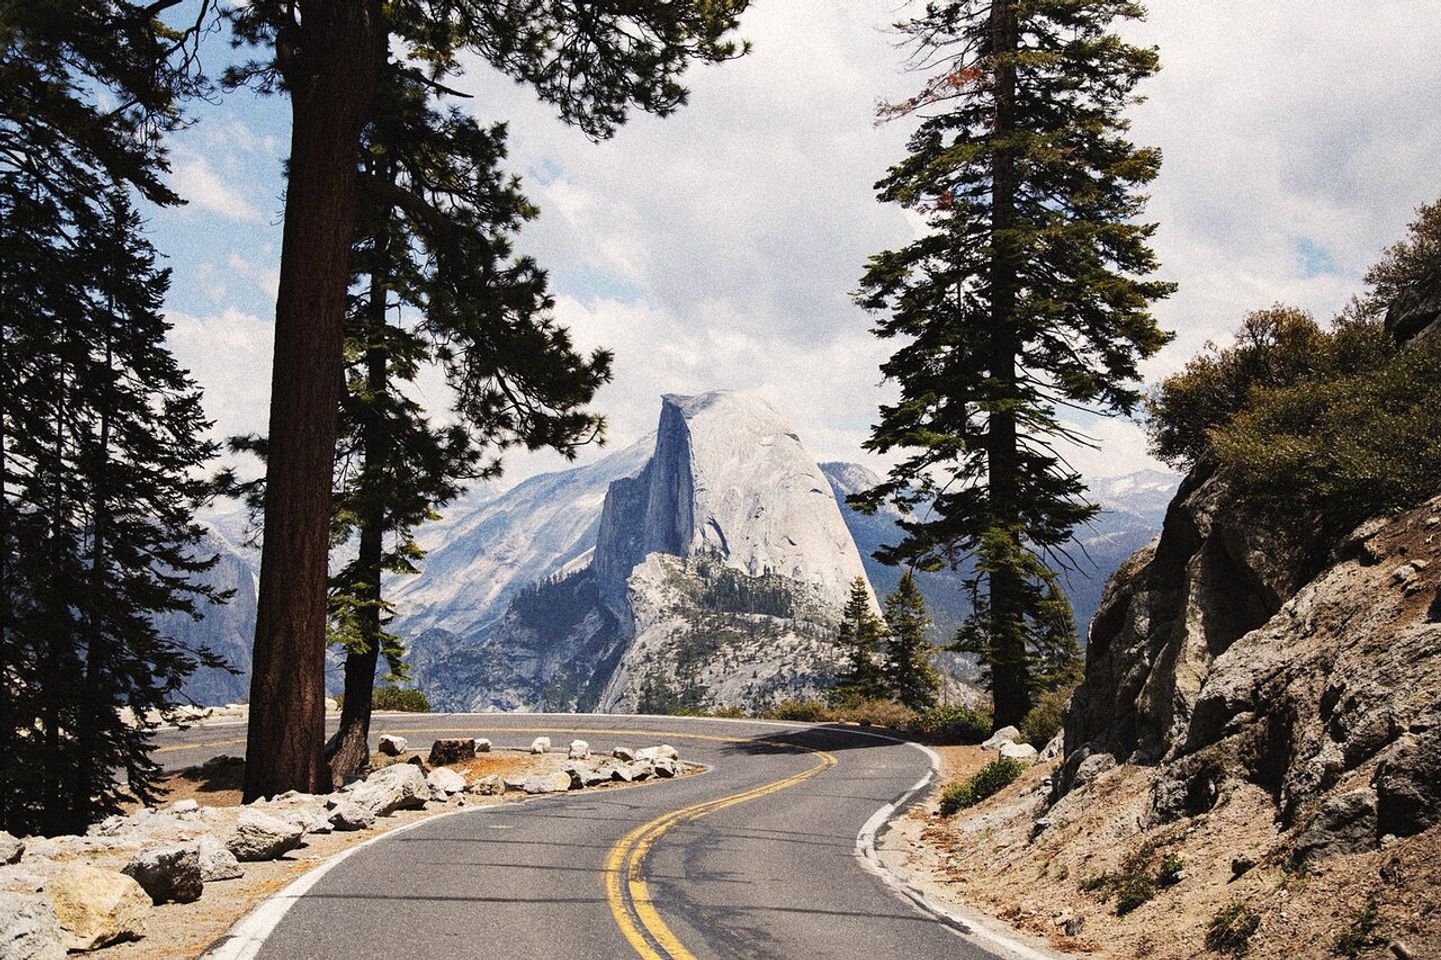 Discover the Epic Adventures of Yosemite National Park